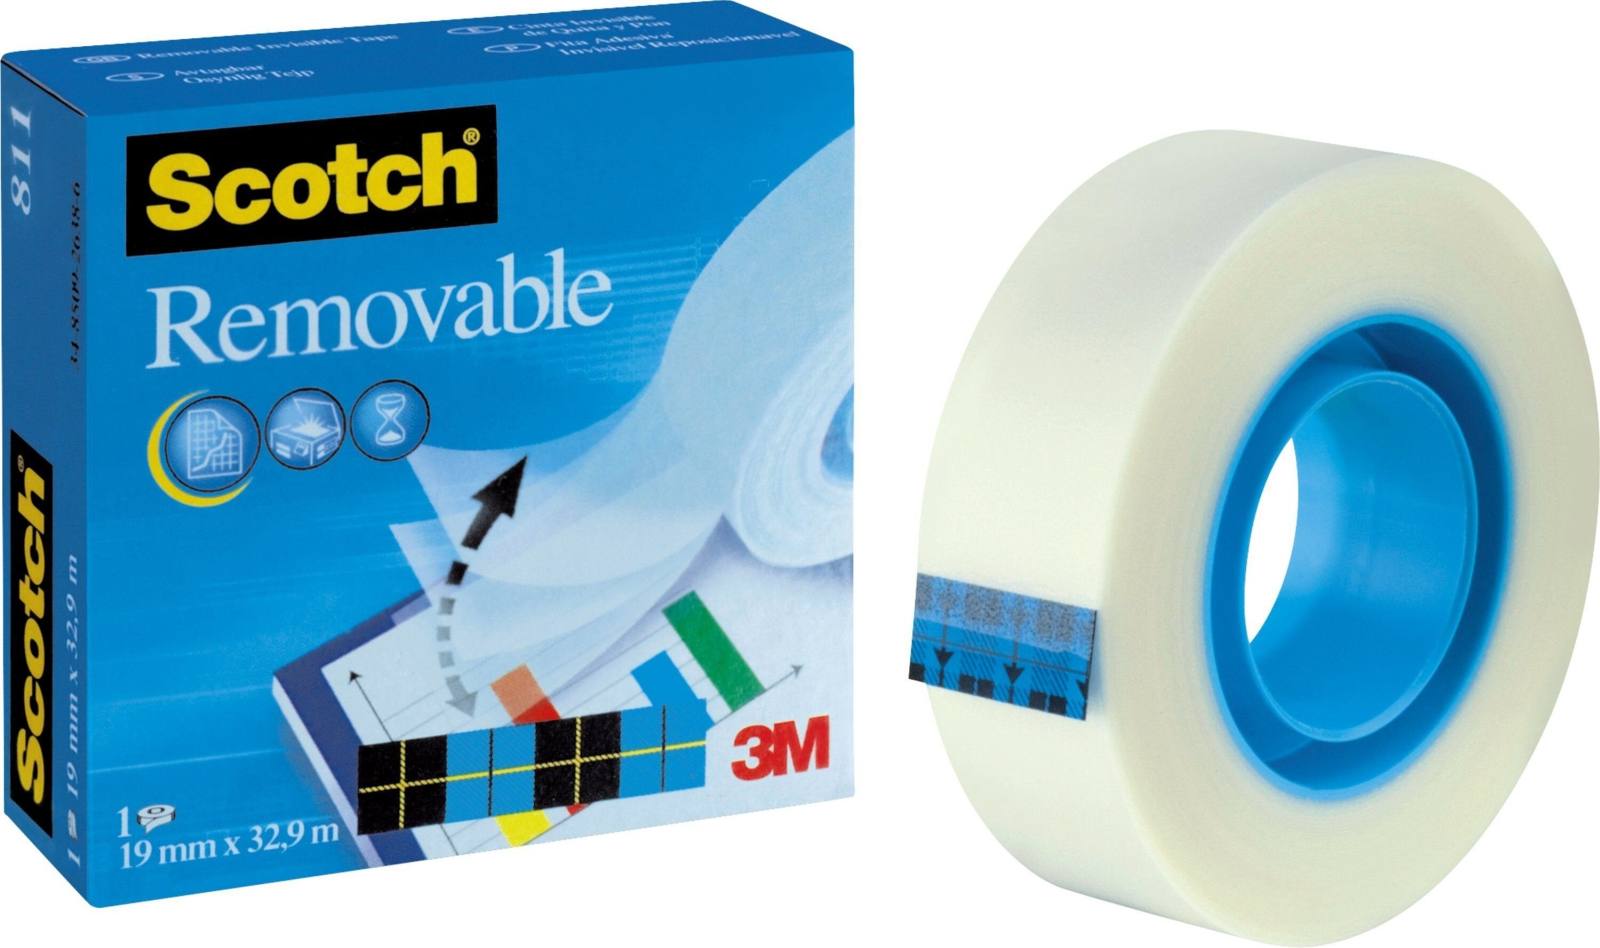 3M Scotch Removable adhesive tape 1 roll 19 mm x 33 m